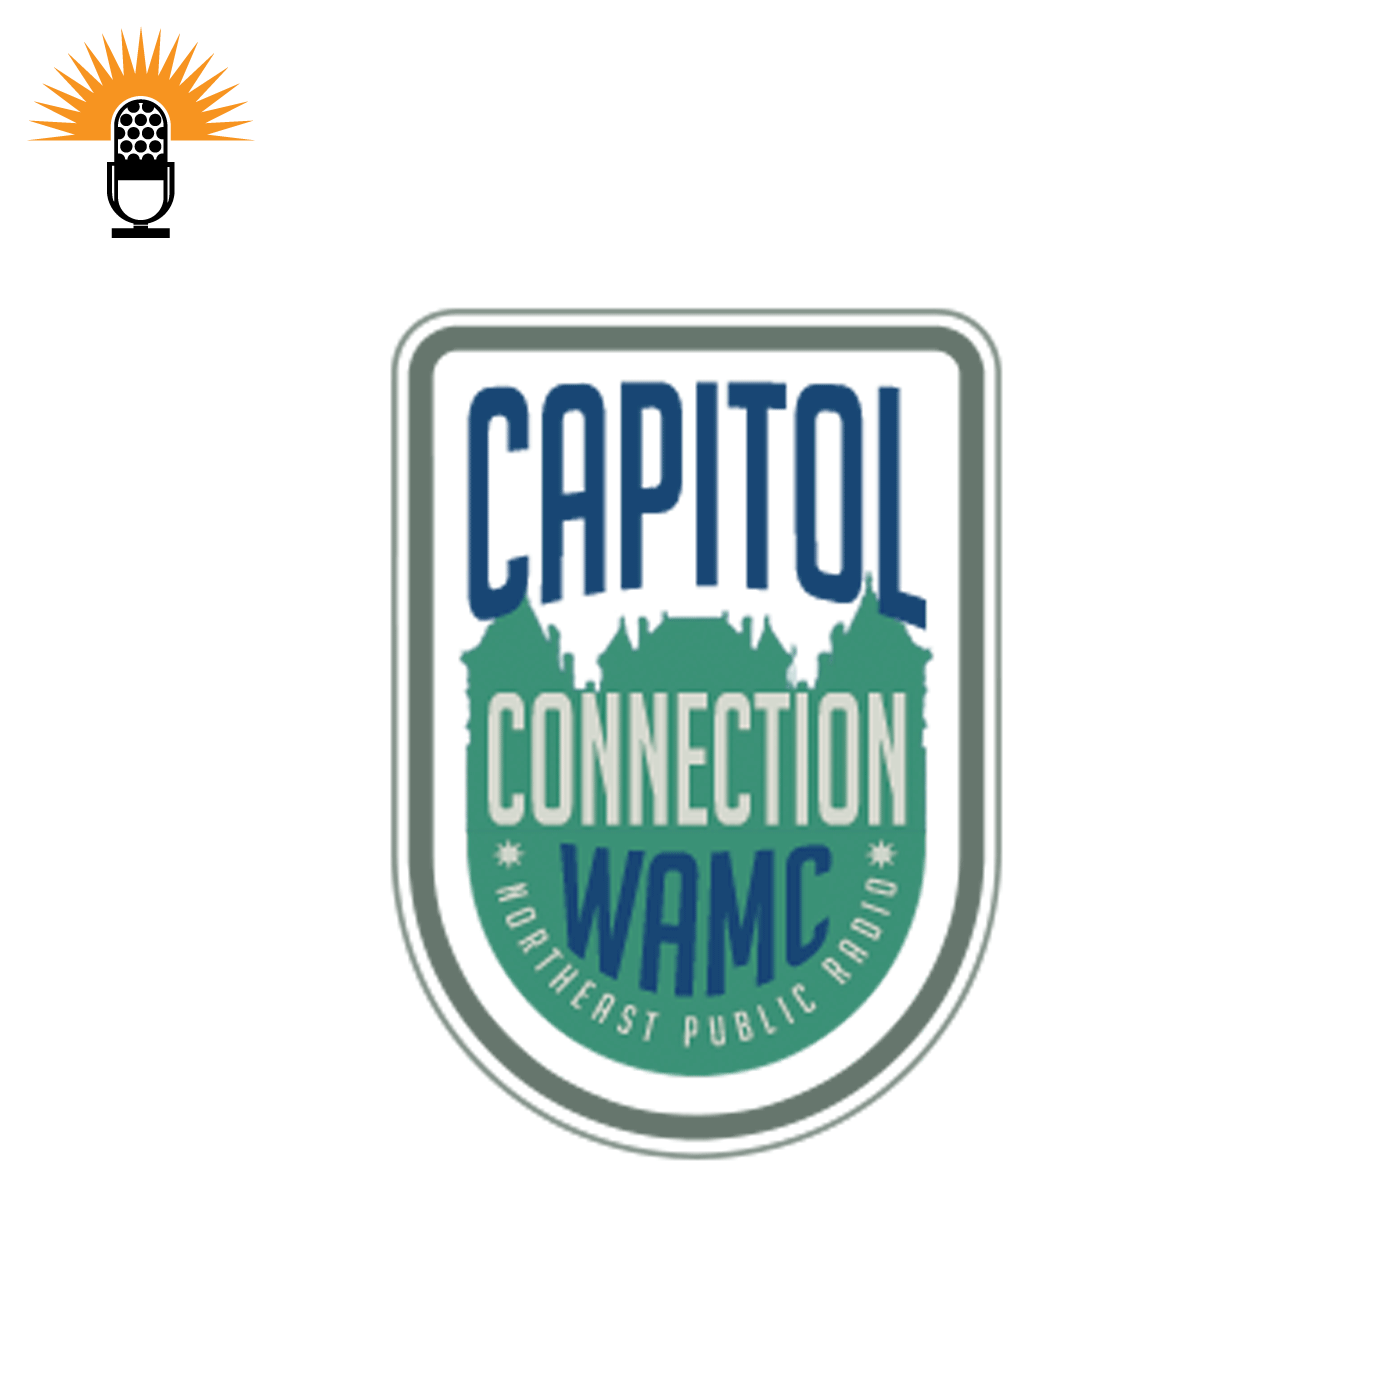 The Capitol Connection - William Aiken, President of RID, Remove Intoxicated Drivers